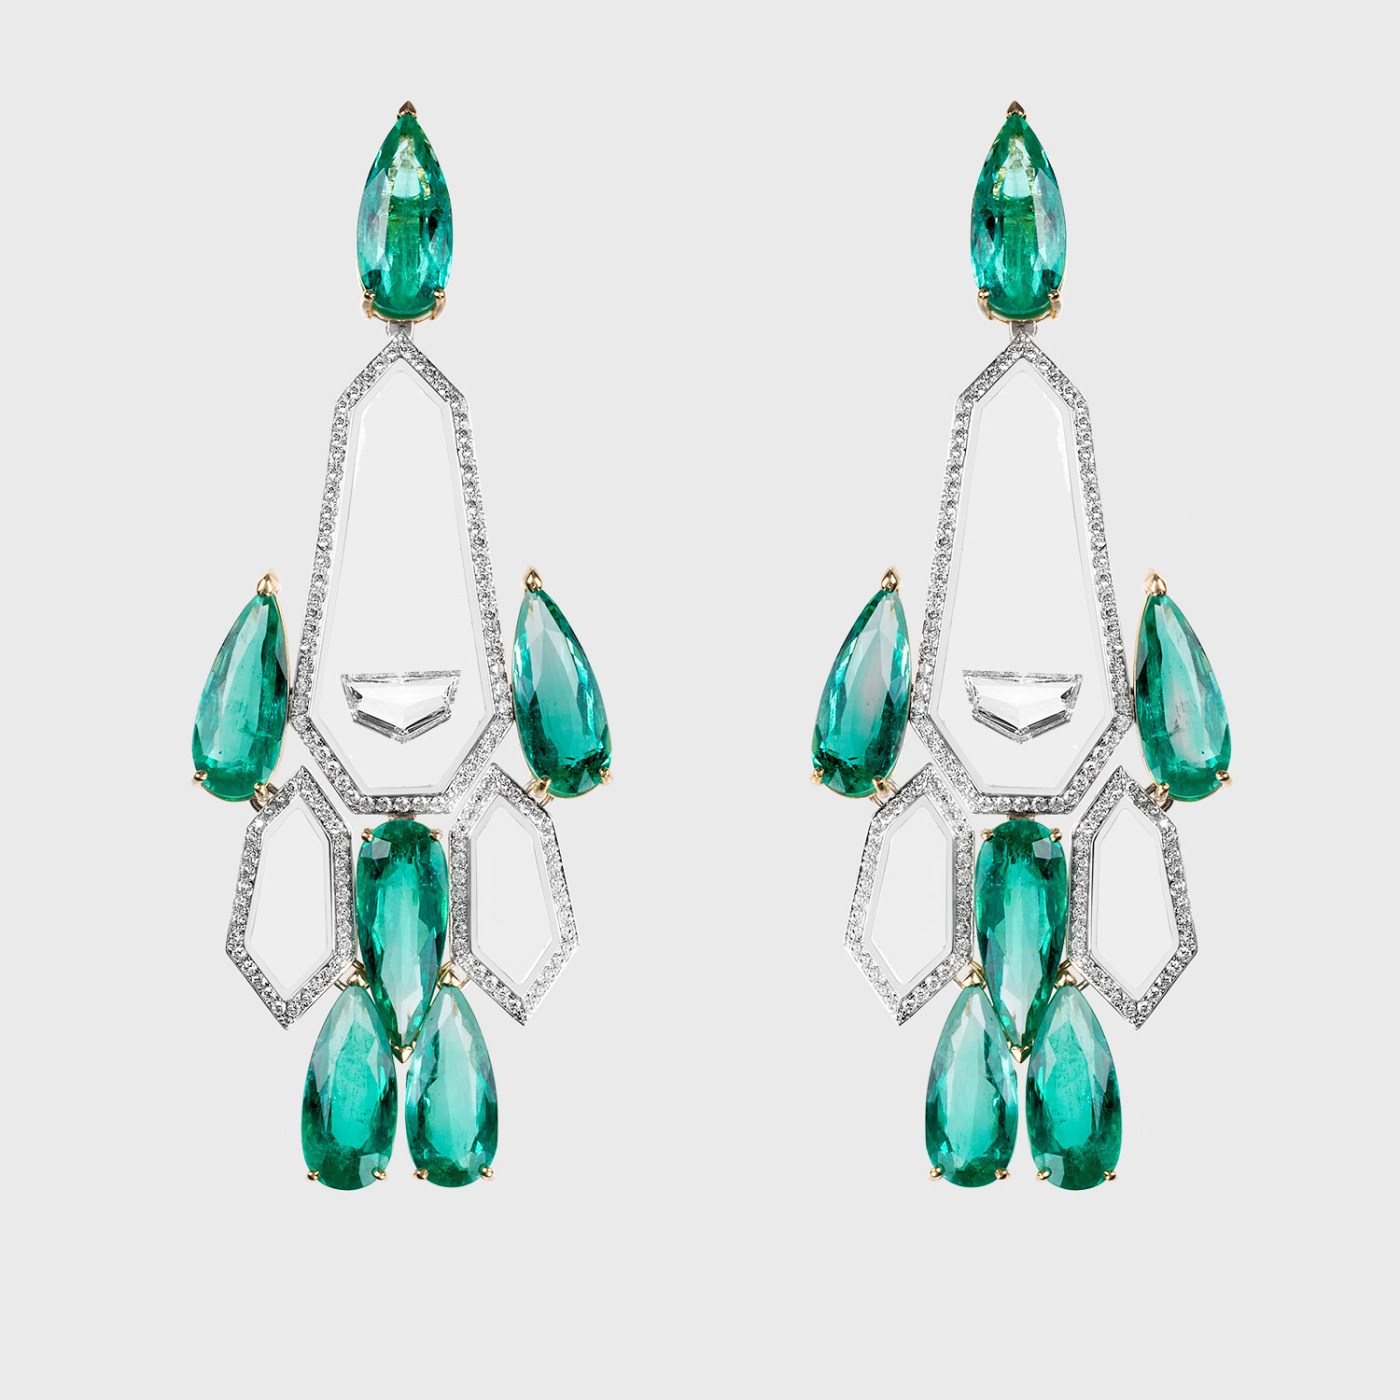 White gold chandelier long earrings with white diamonds and emeralds in translucent enamel